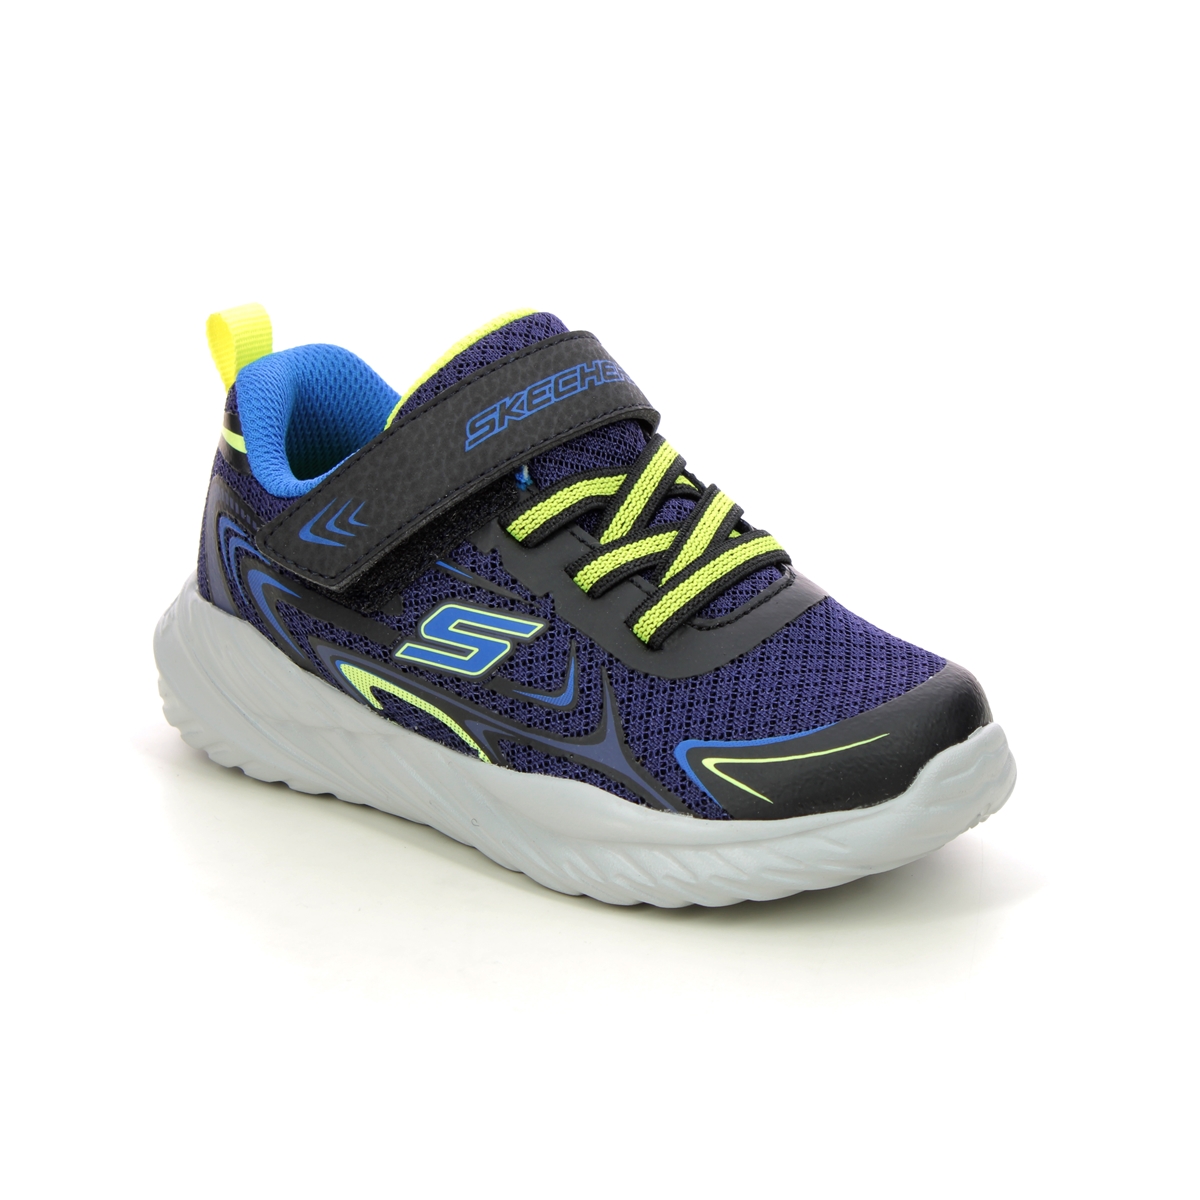 Skechers Lil Sprinter Navy Lime Kids Trainers 403887N In Size 23 In Plain Navy Lime For kids